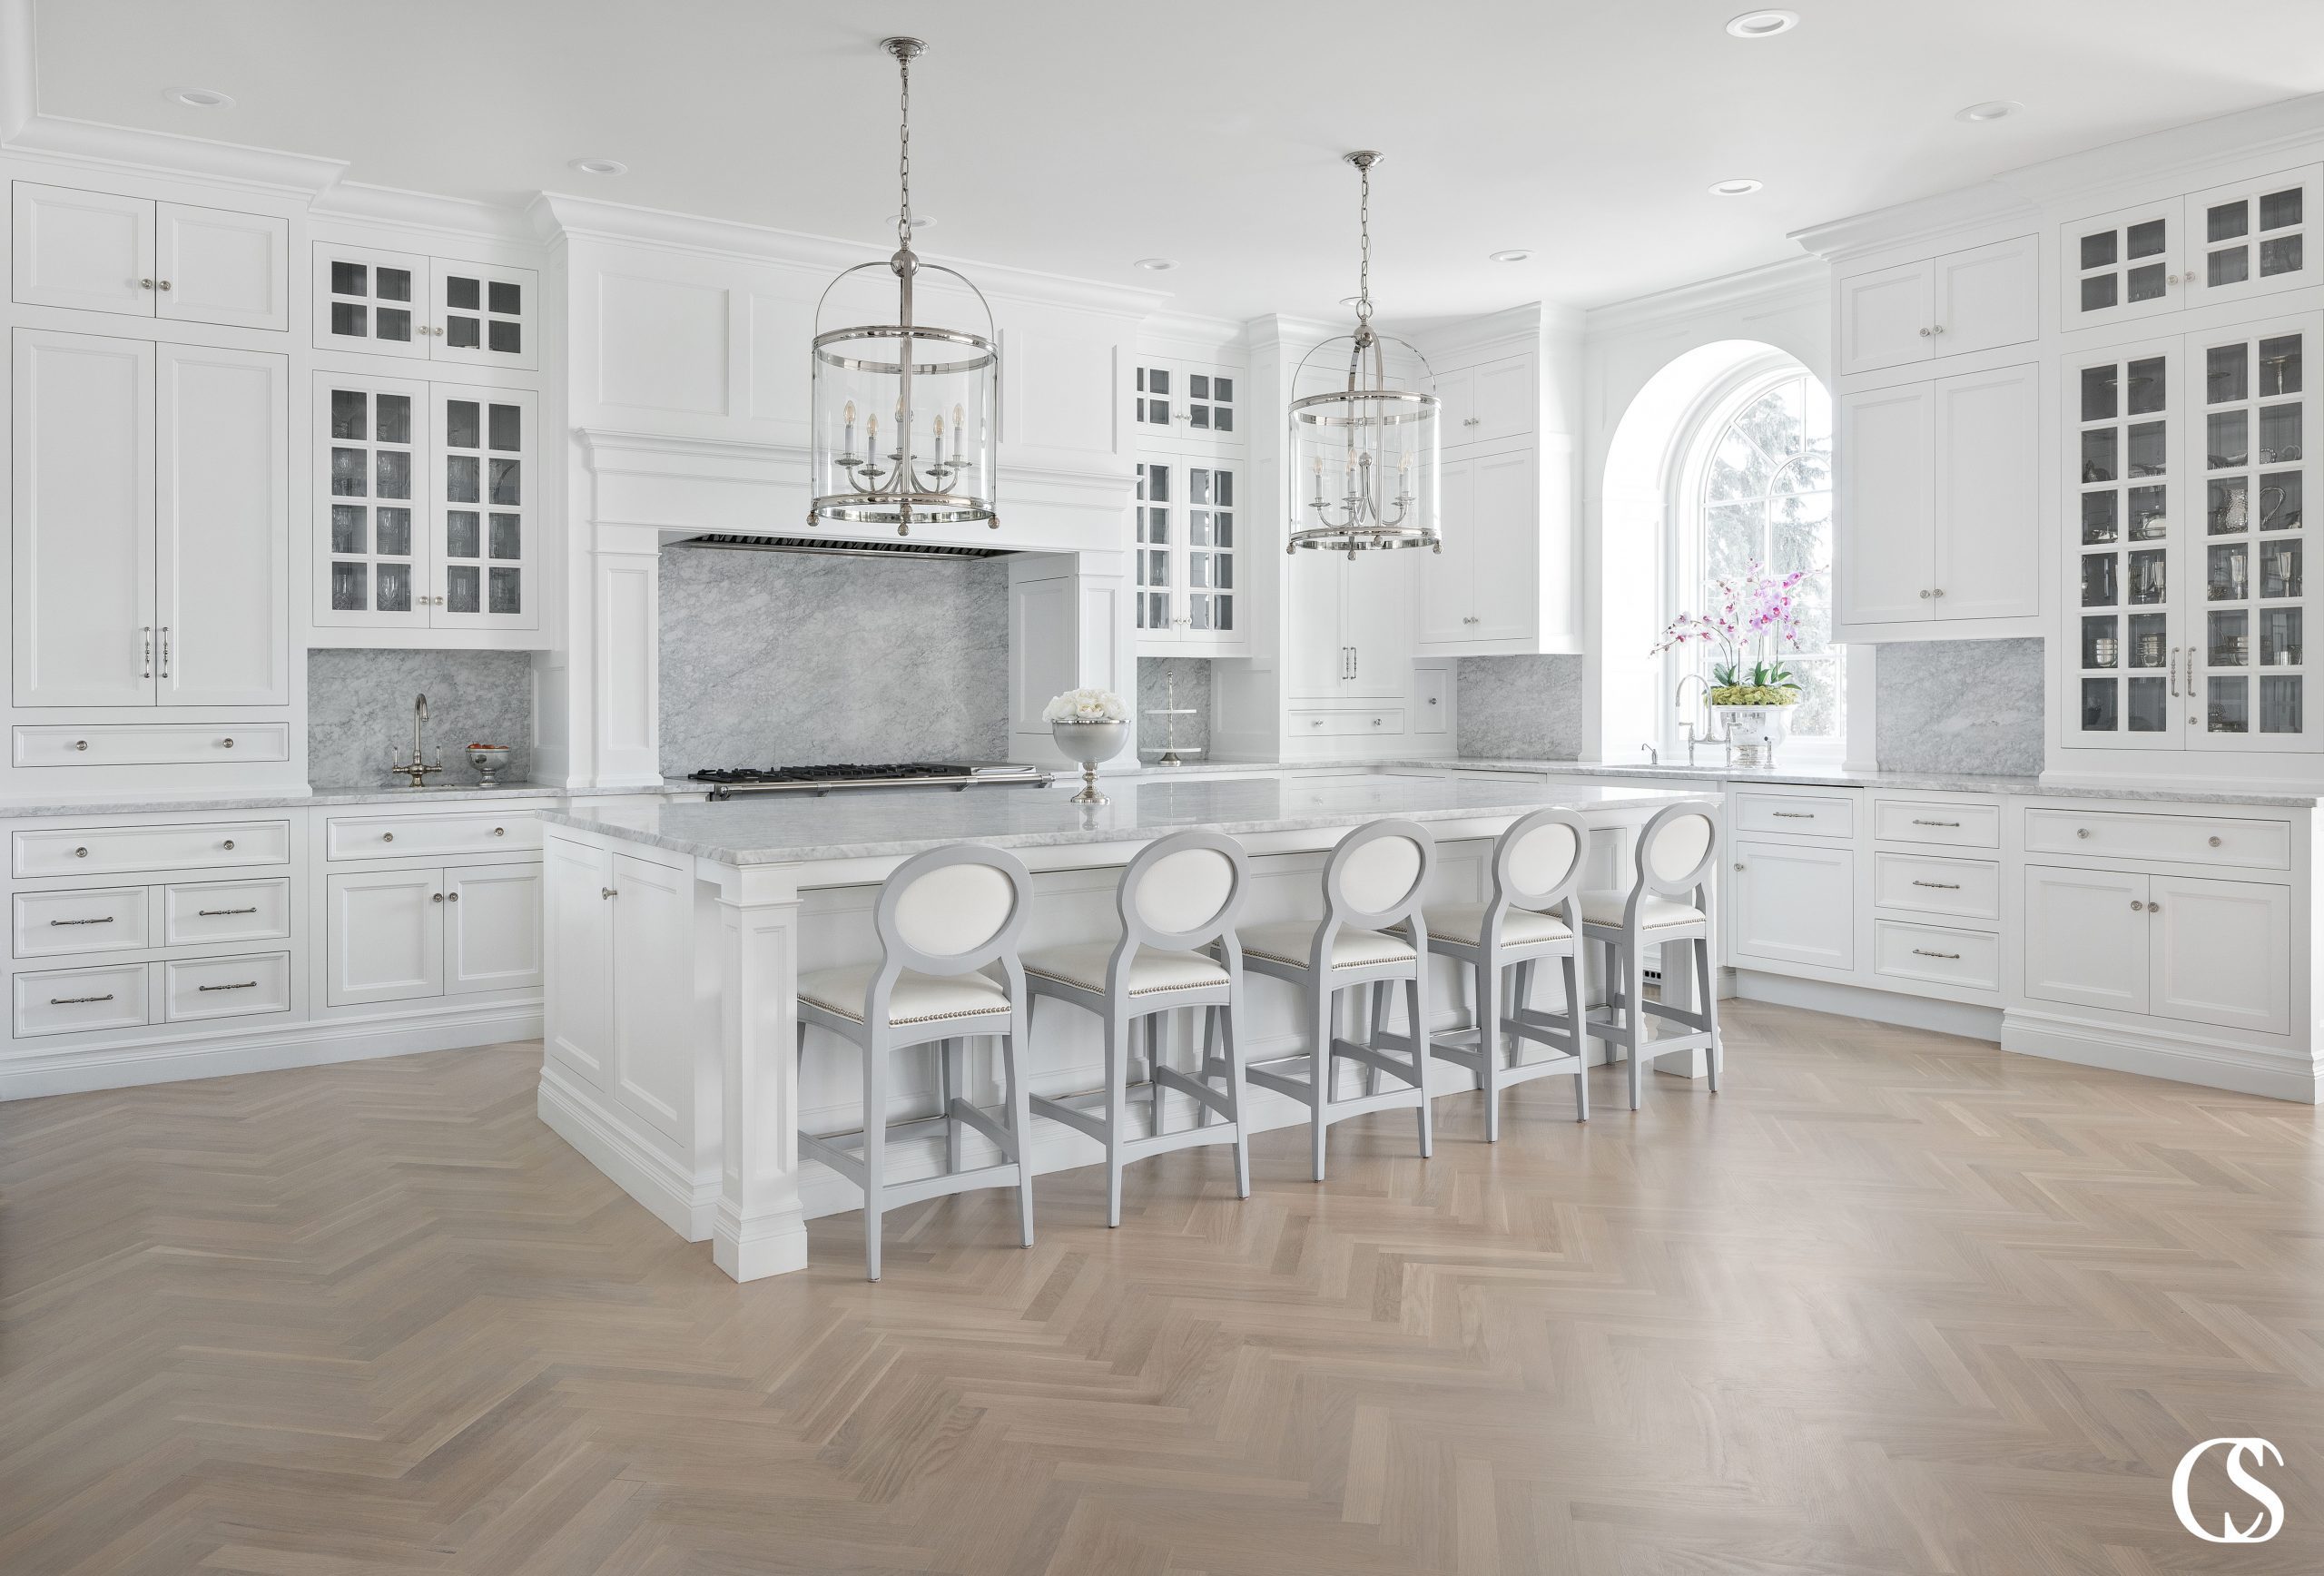 This white kitchen island design creates an anchor for this large room to stay grounded.